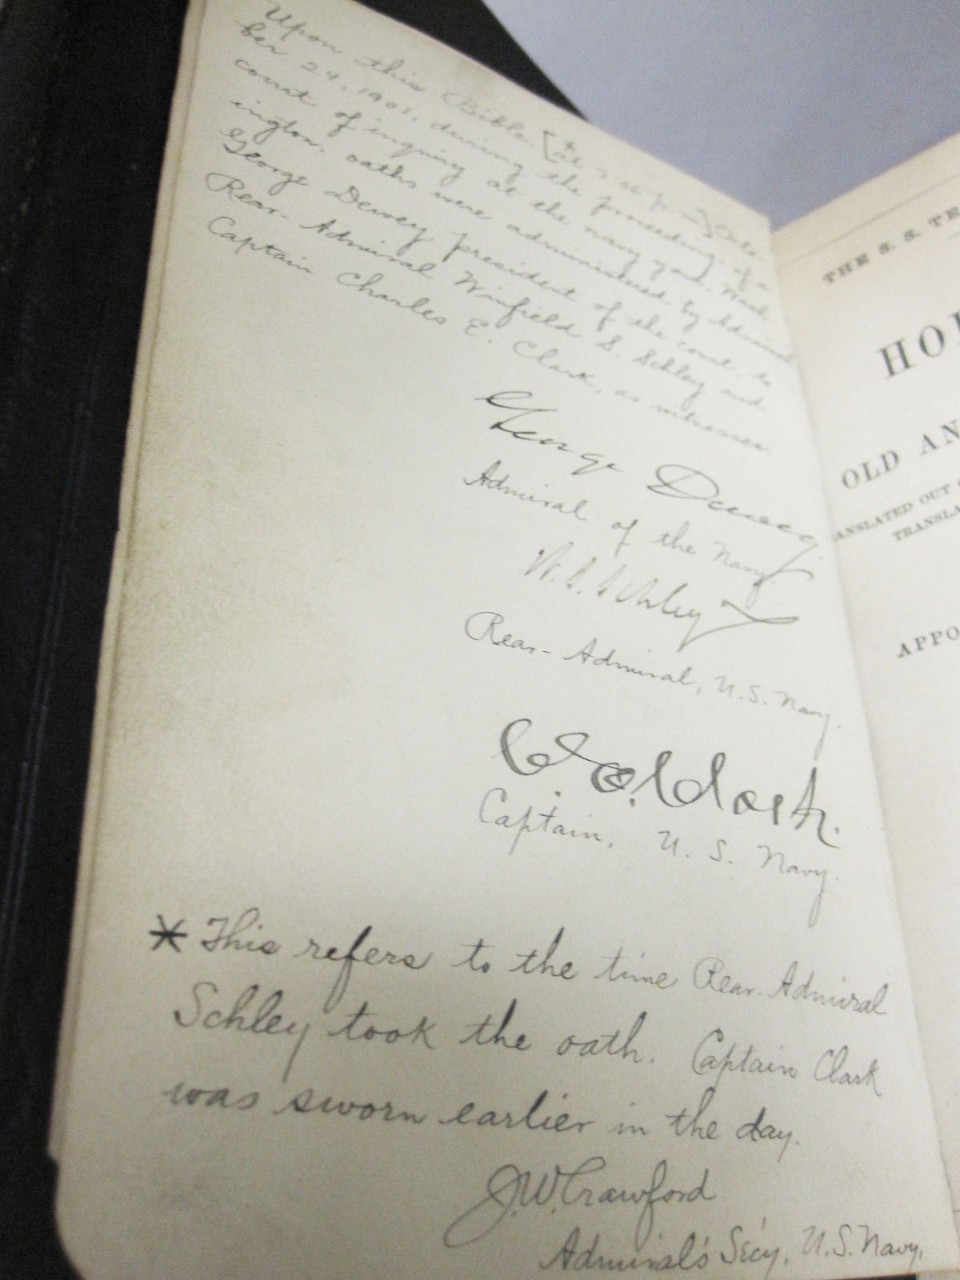 Interior view of Bible used at Court of Inquiry, has signature of George Dewey